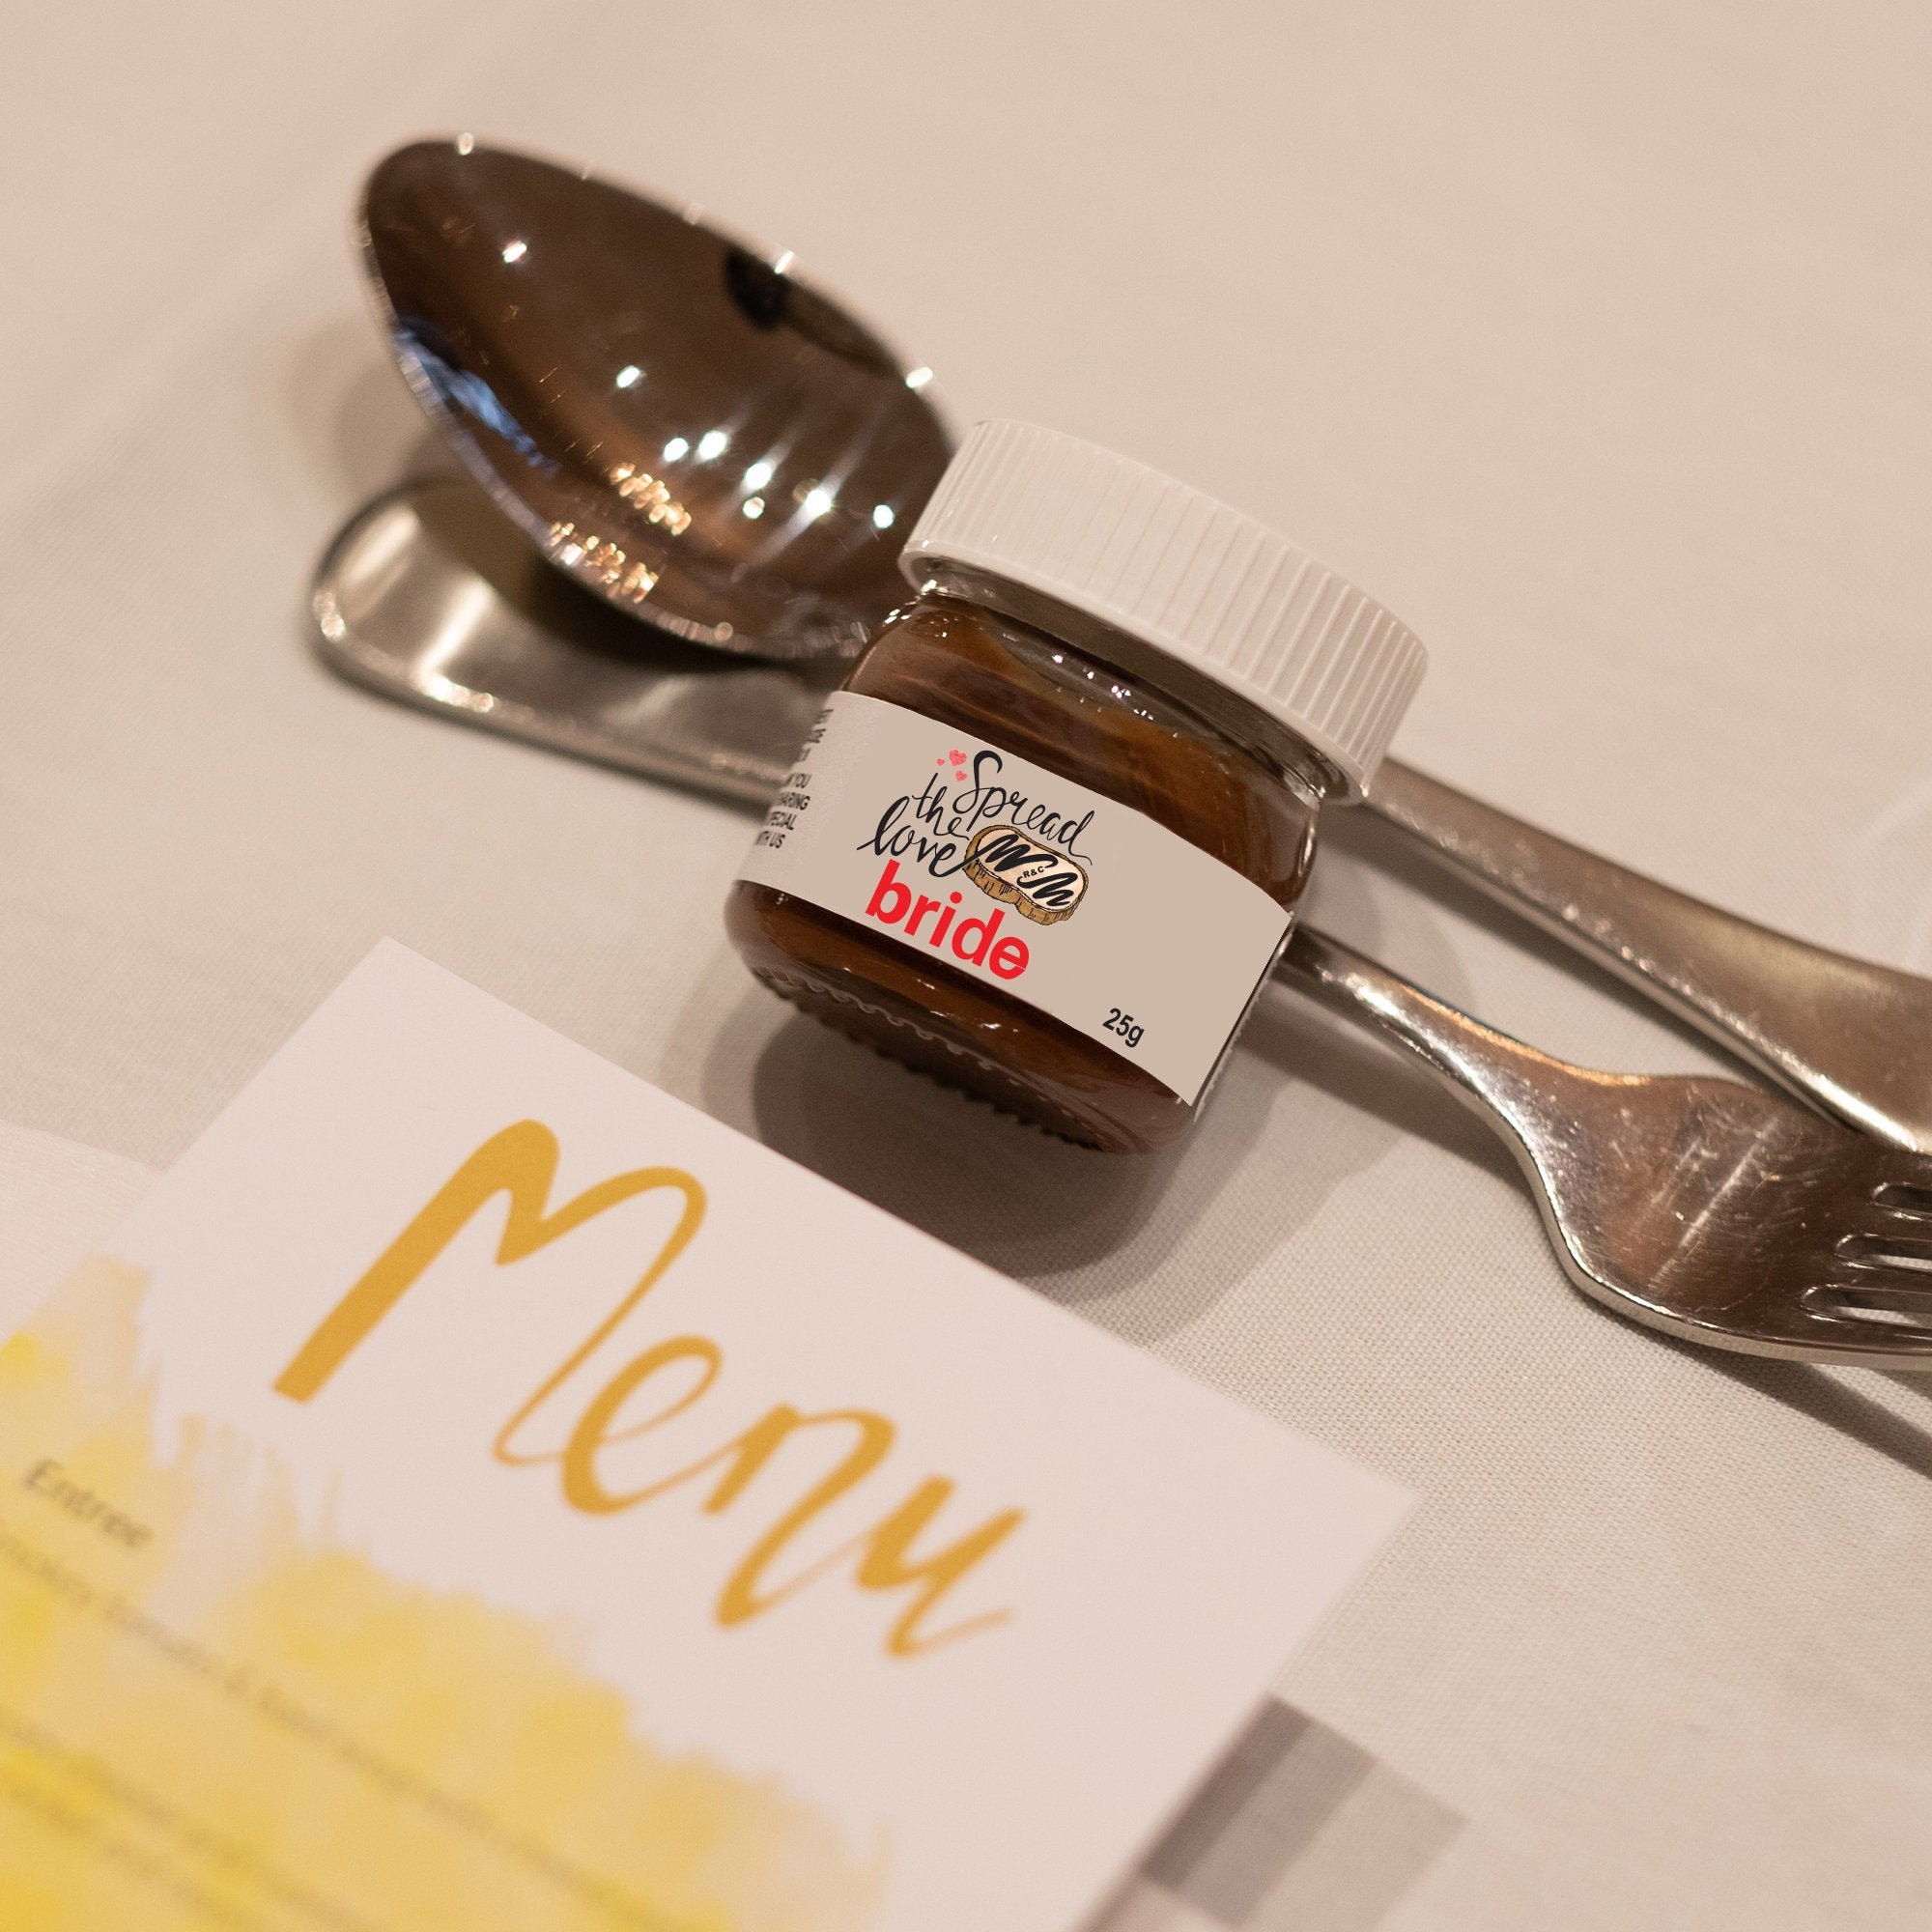 32 personalised personalized Mini Nutella labels favours / wedding /  communion / baby shower DIGITAL